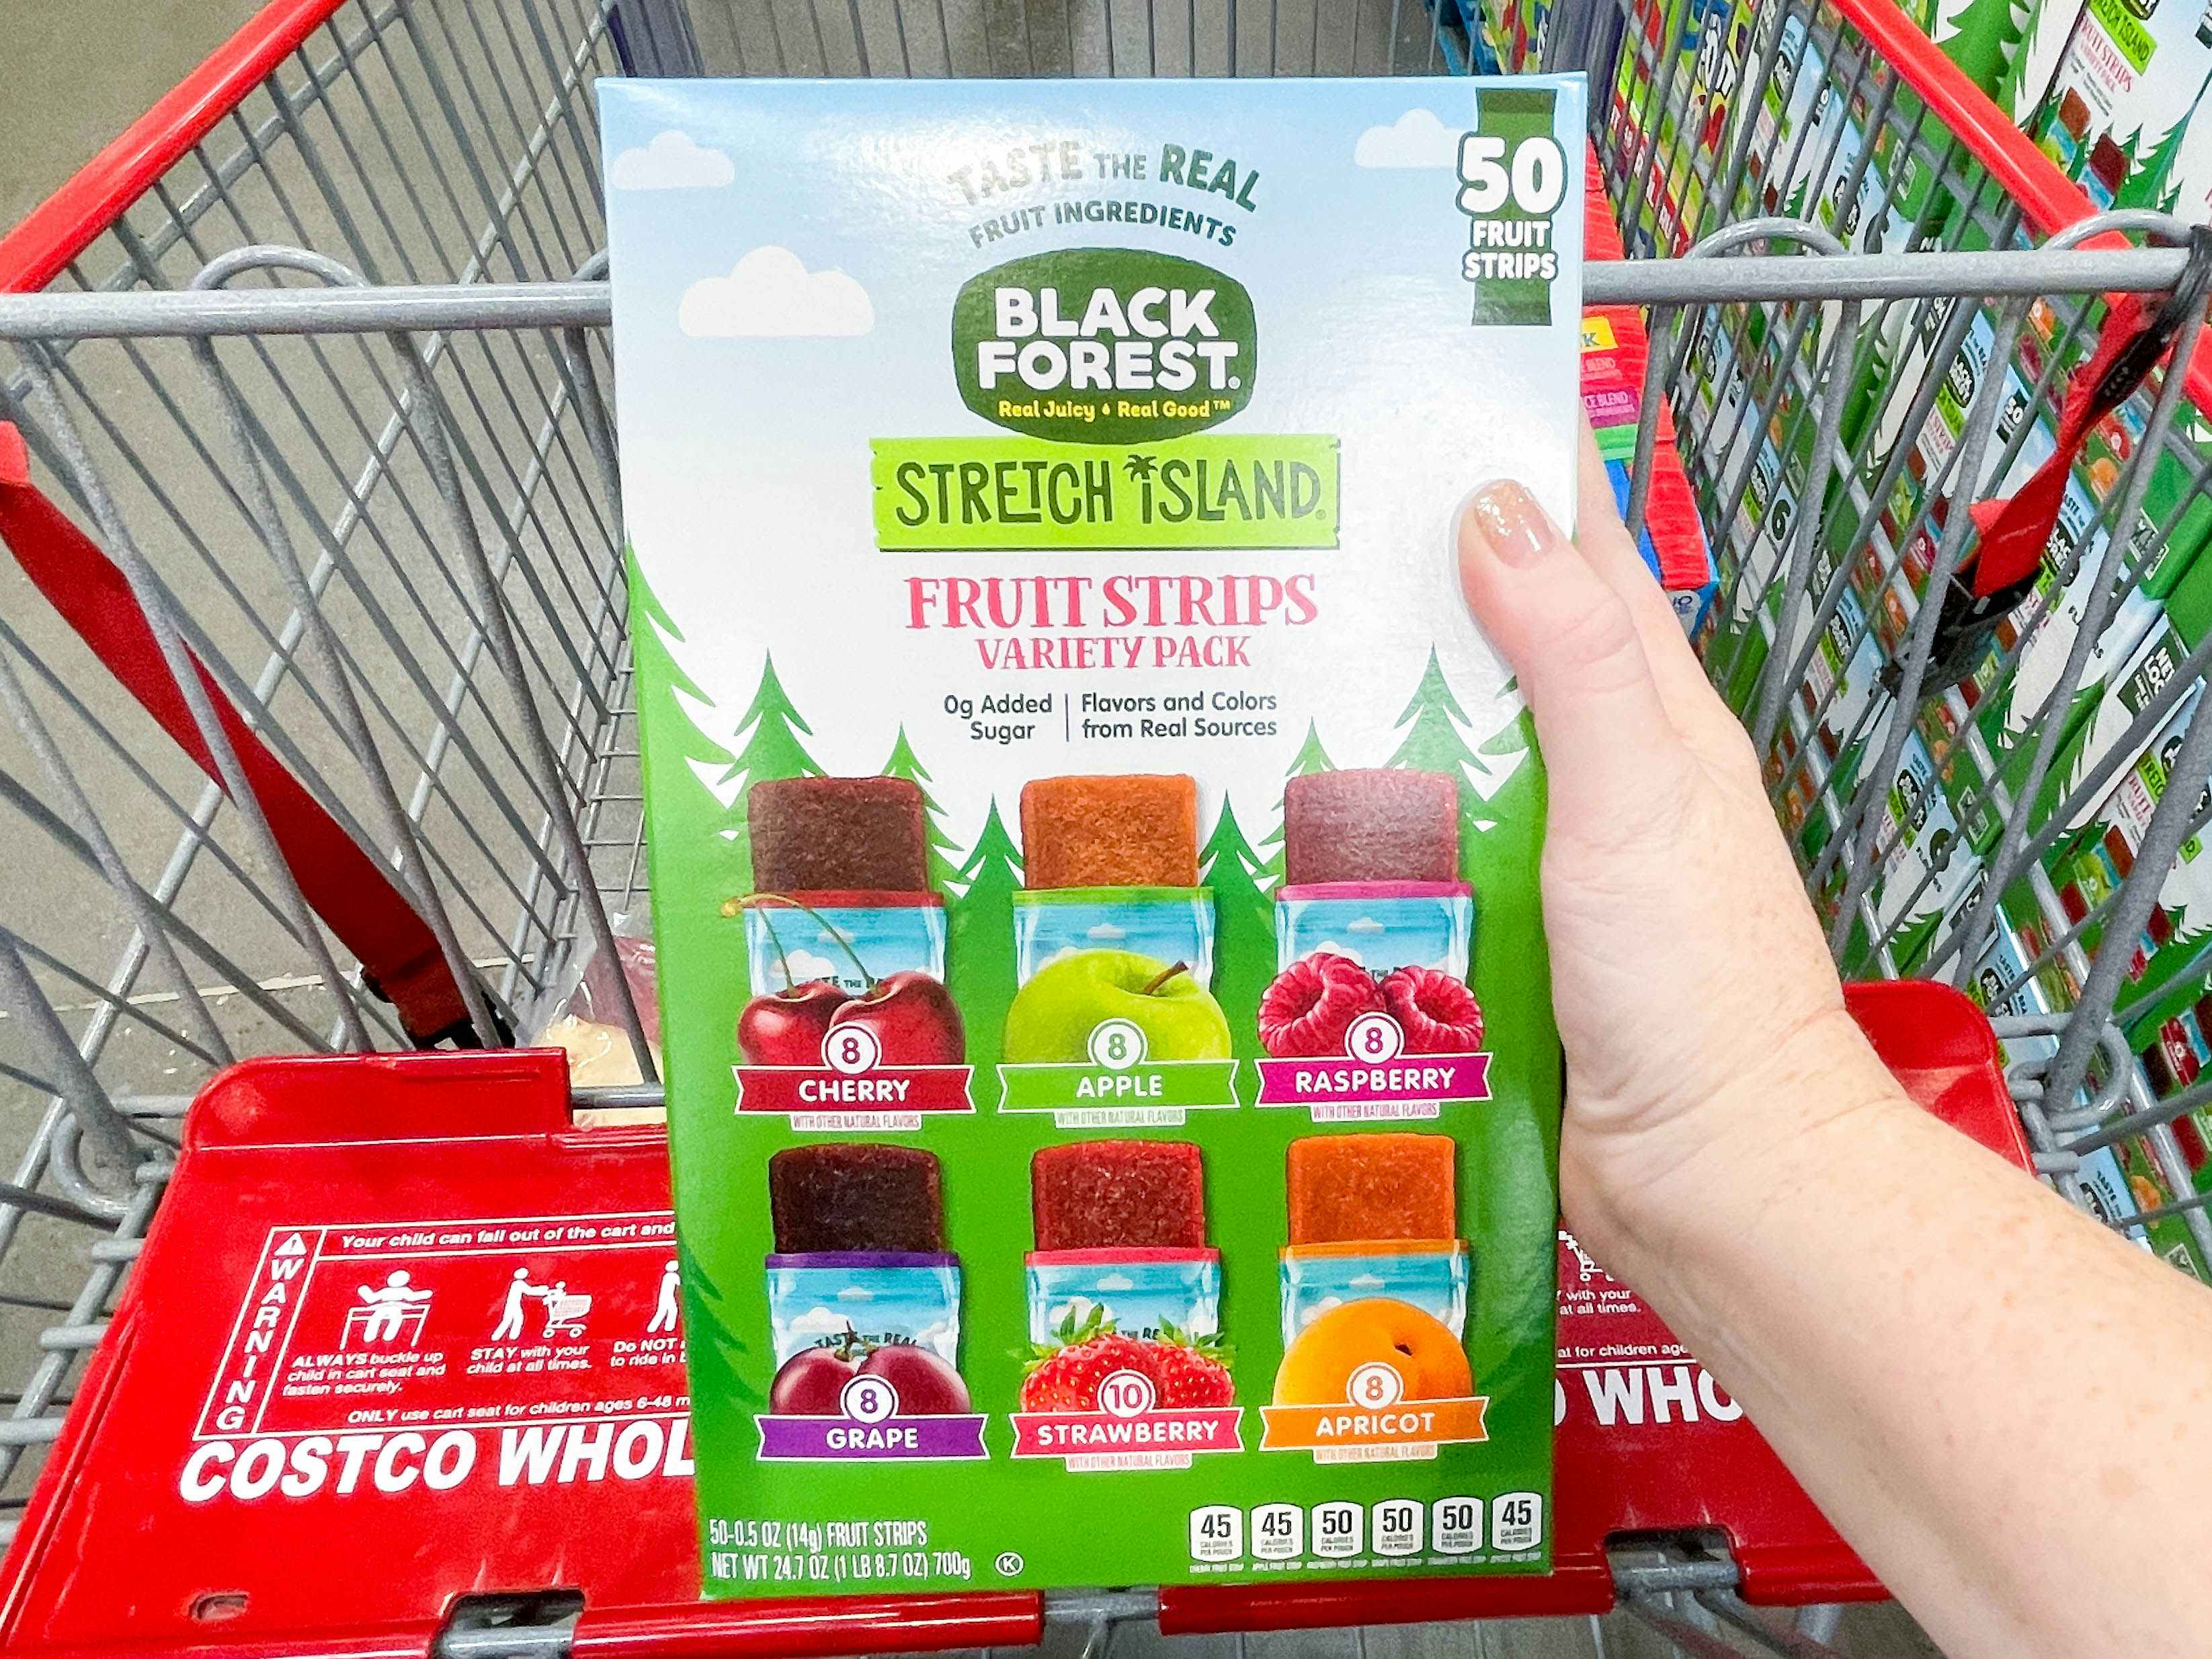 a box of fruit strips being held in store